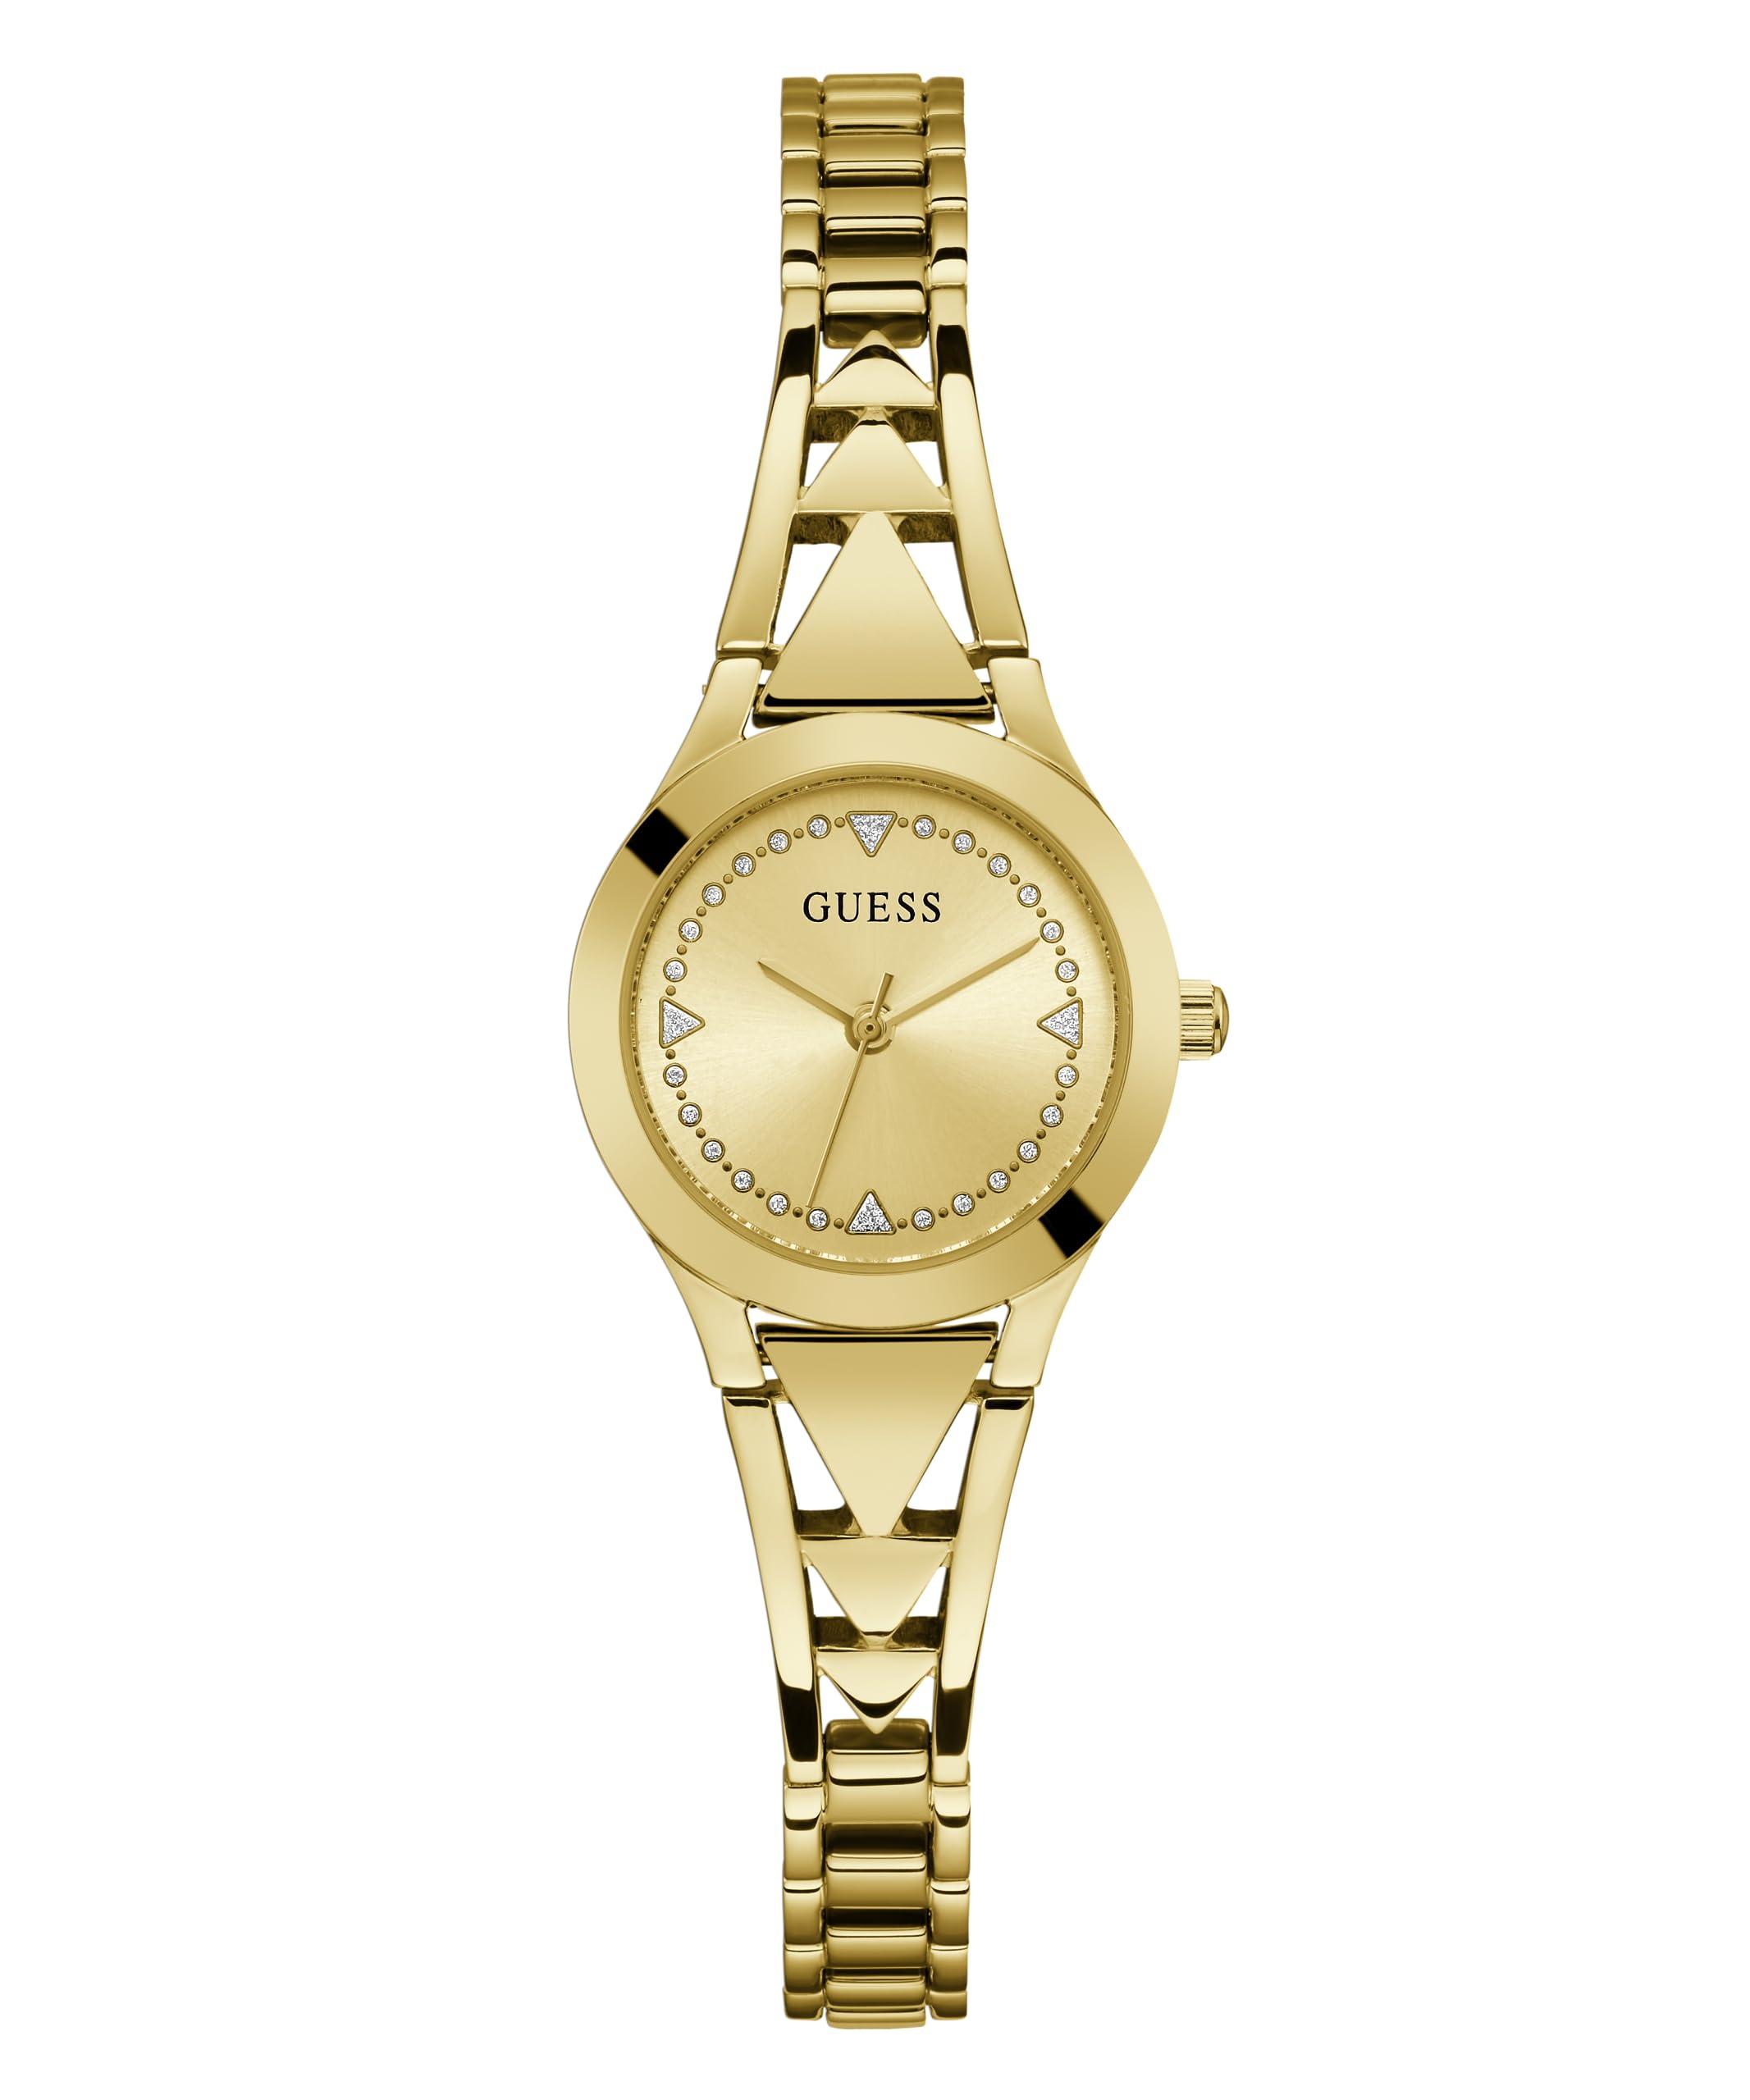 Symbol Luxury. Sophisticated And Is Steel | Of in Modern Watch Reflect And Analog Case Metallic A Mm The Movement Lyst A Its 3-hand 26 Tessa Guess